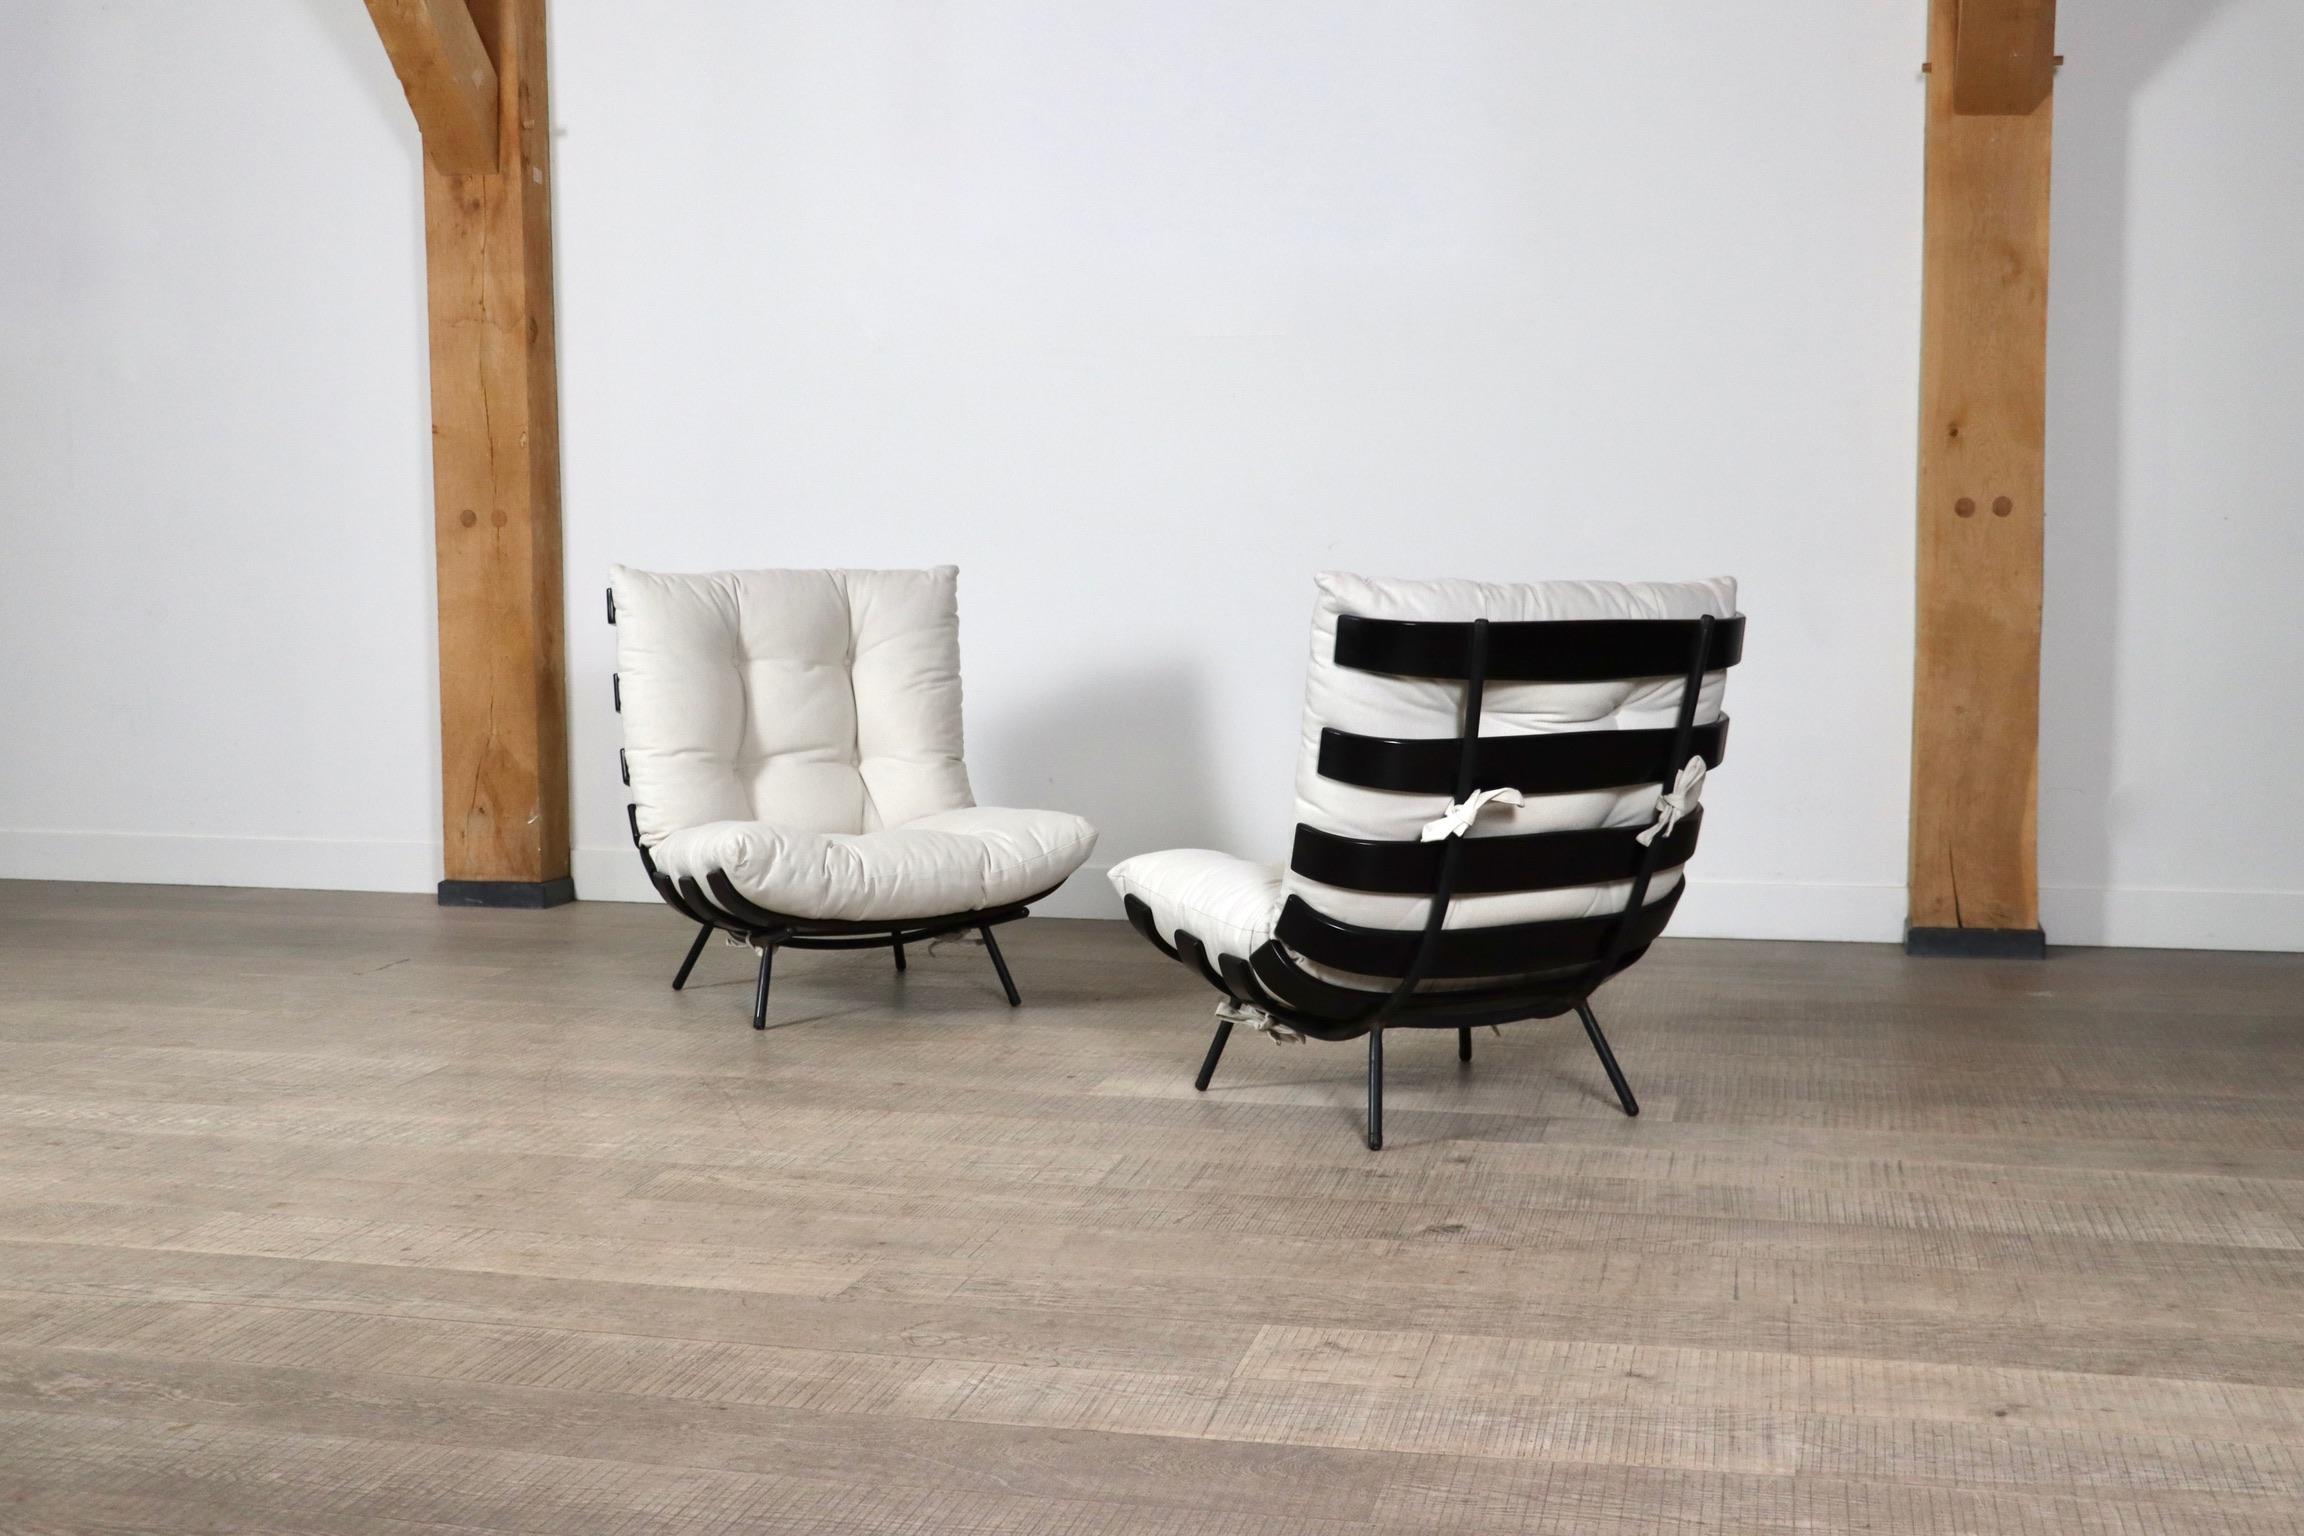 The beautiful 'Costela' lounge chairs by Carlo Hauner and Martin Eisler are one of the icons of Brazilian Mid-Century Modern Design. The name ‘Costela’ which translates as rib, is apparent in the design with it’s eight dark stained wooden slats that